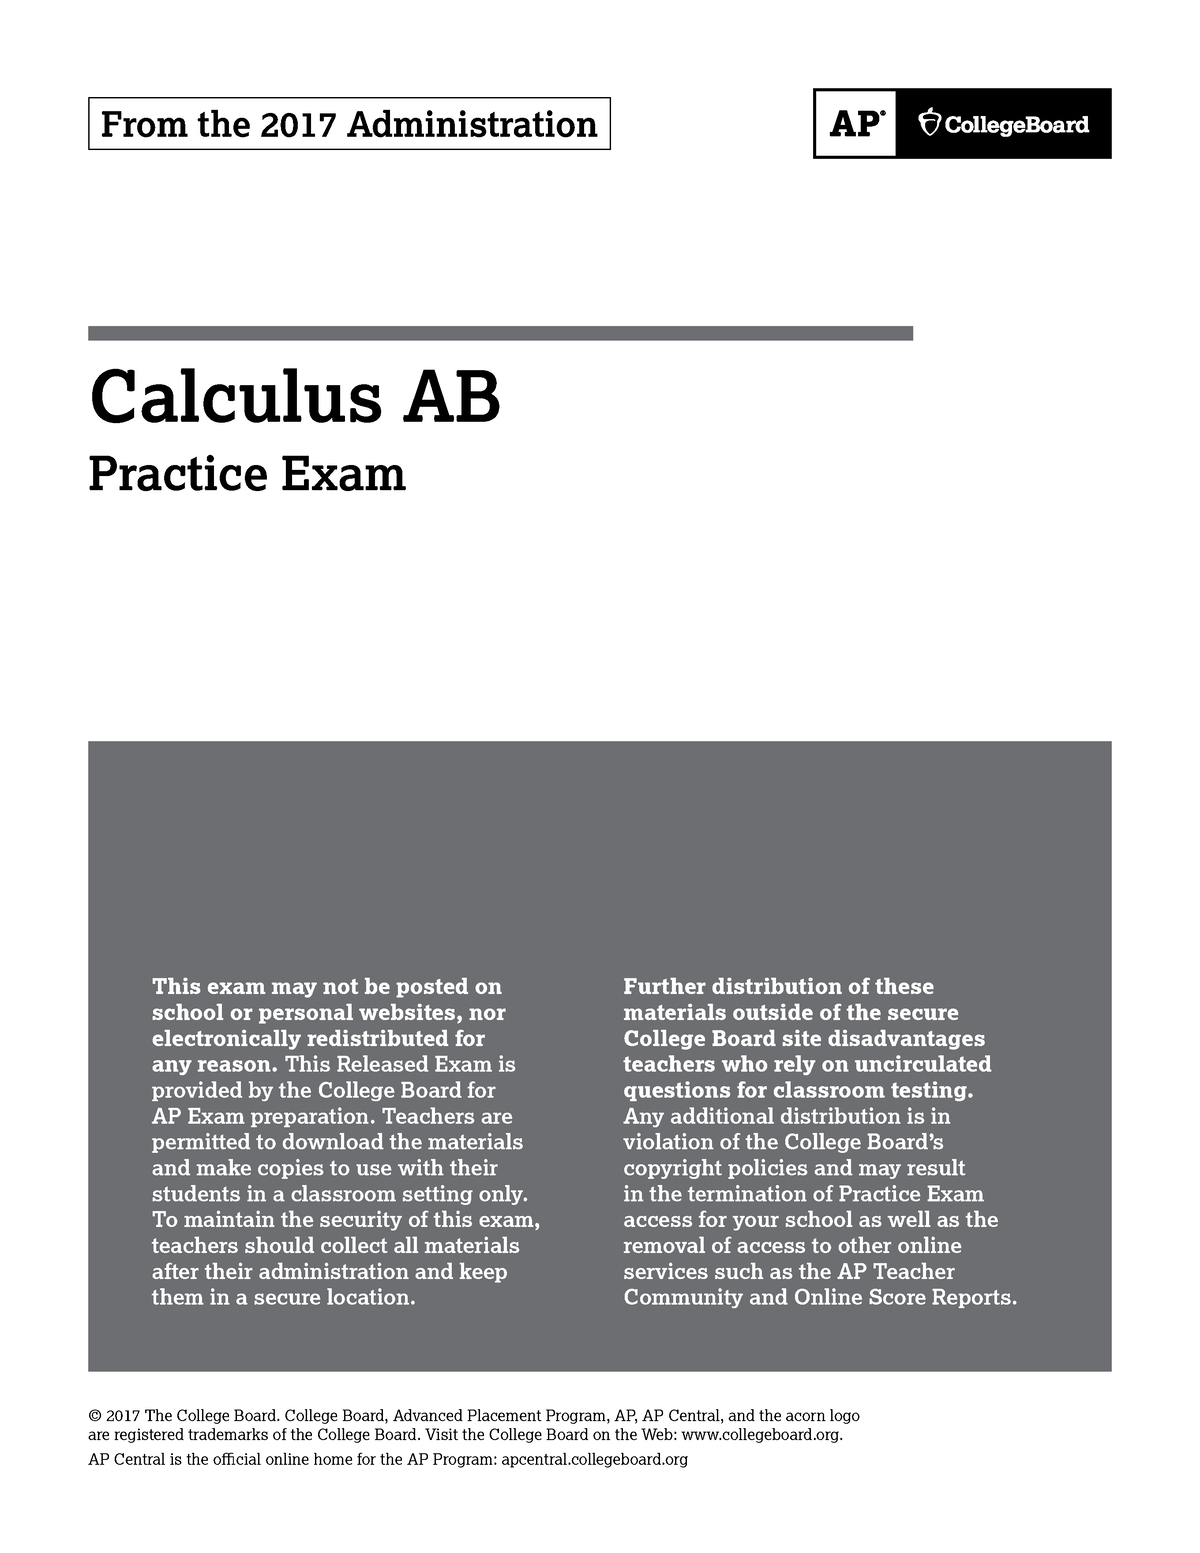 ap-calculus-ab-2017-practice-exam-from-the-2017-administration-calculus-ab-practice-exam-this